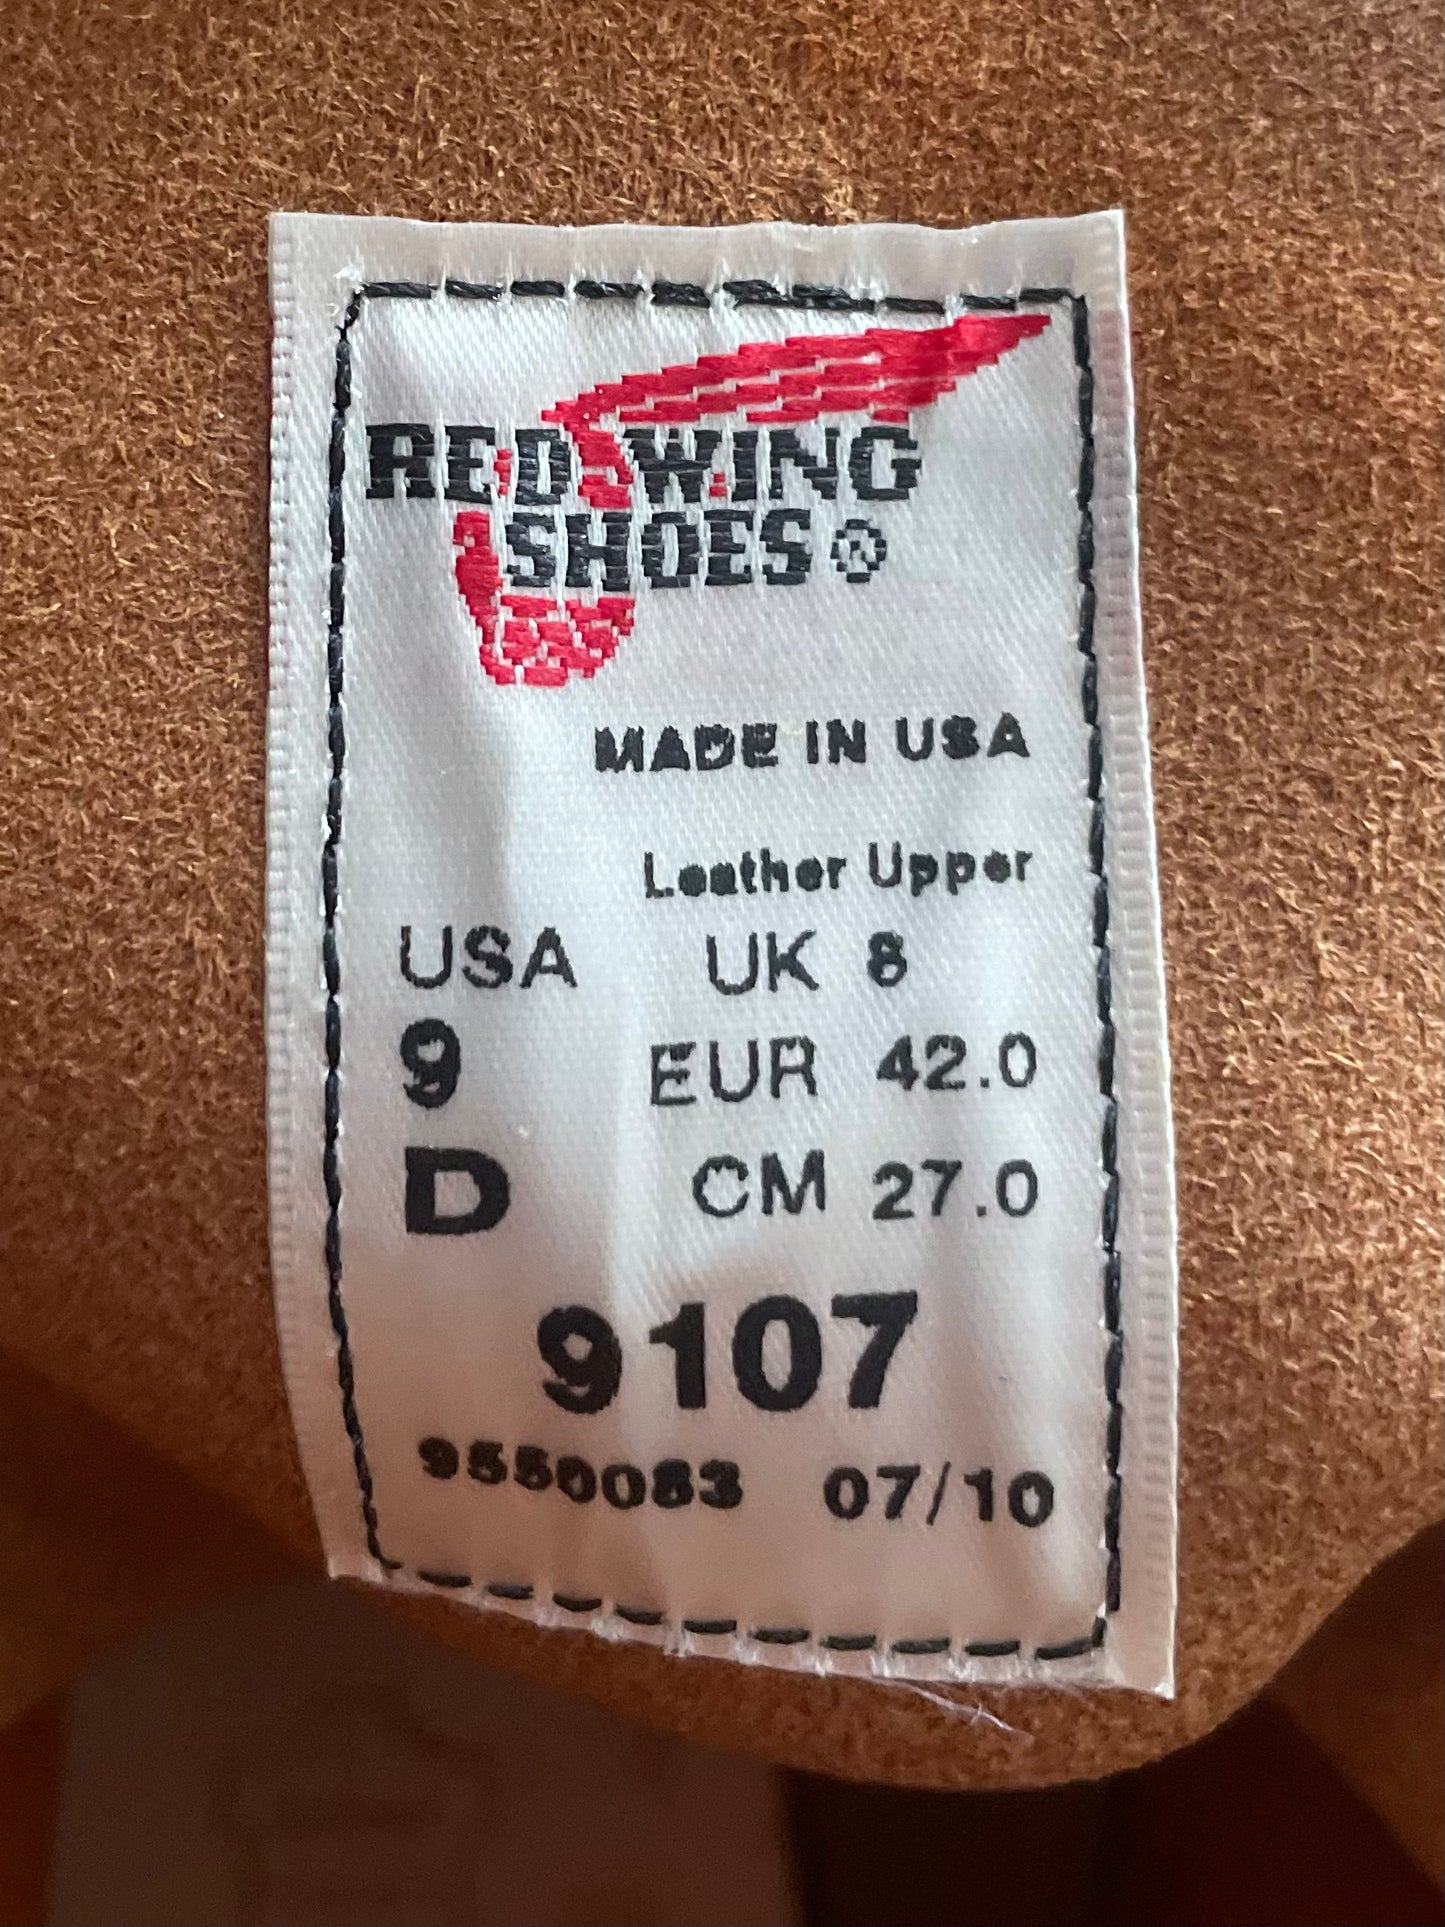 Size 9 D (42 EU ) Red Wing Heritage Classic Round Toe 9107 Boots Made In USA ( Second )